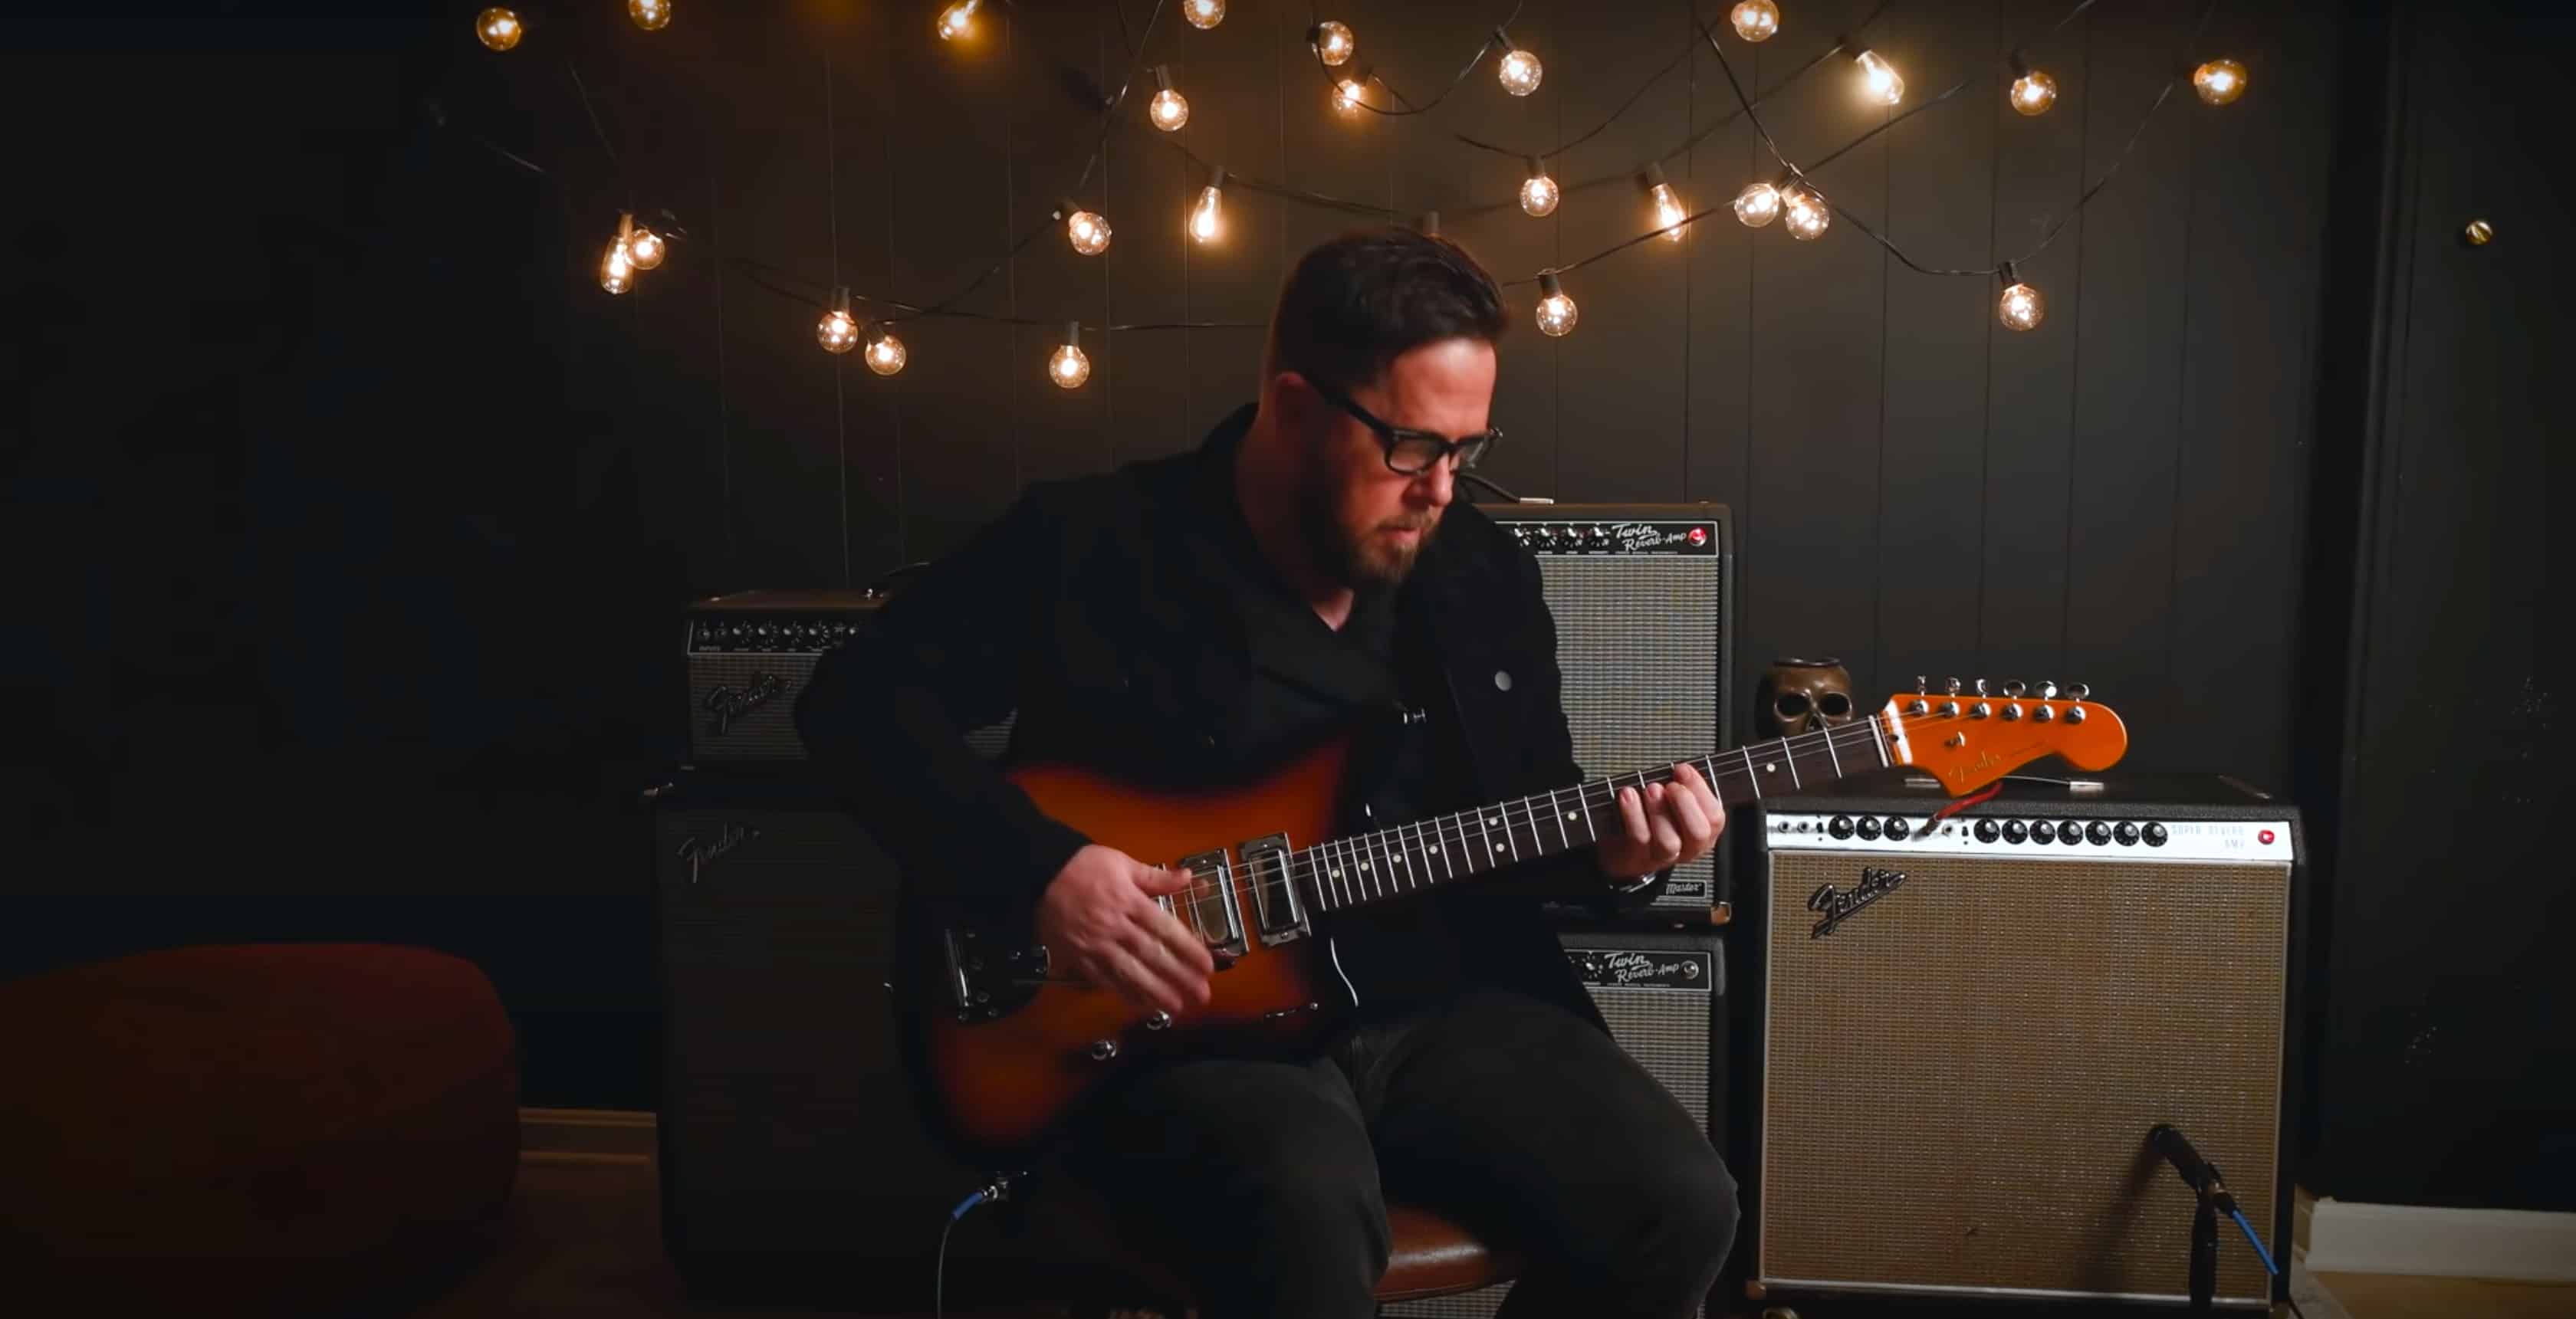 Chris Tapp of The Cold Stares Demos The New Fender Spark-O-Matic Jazzmaster